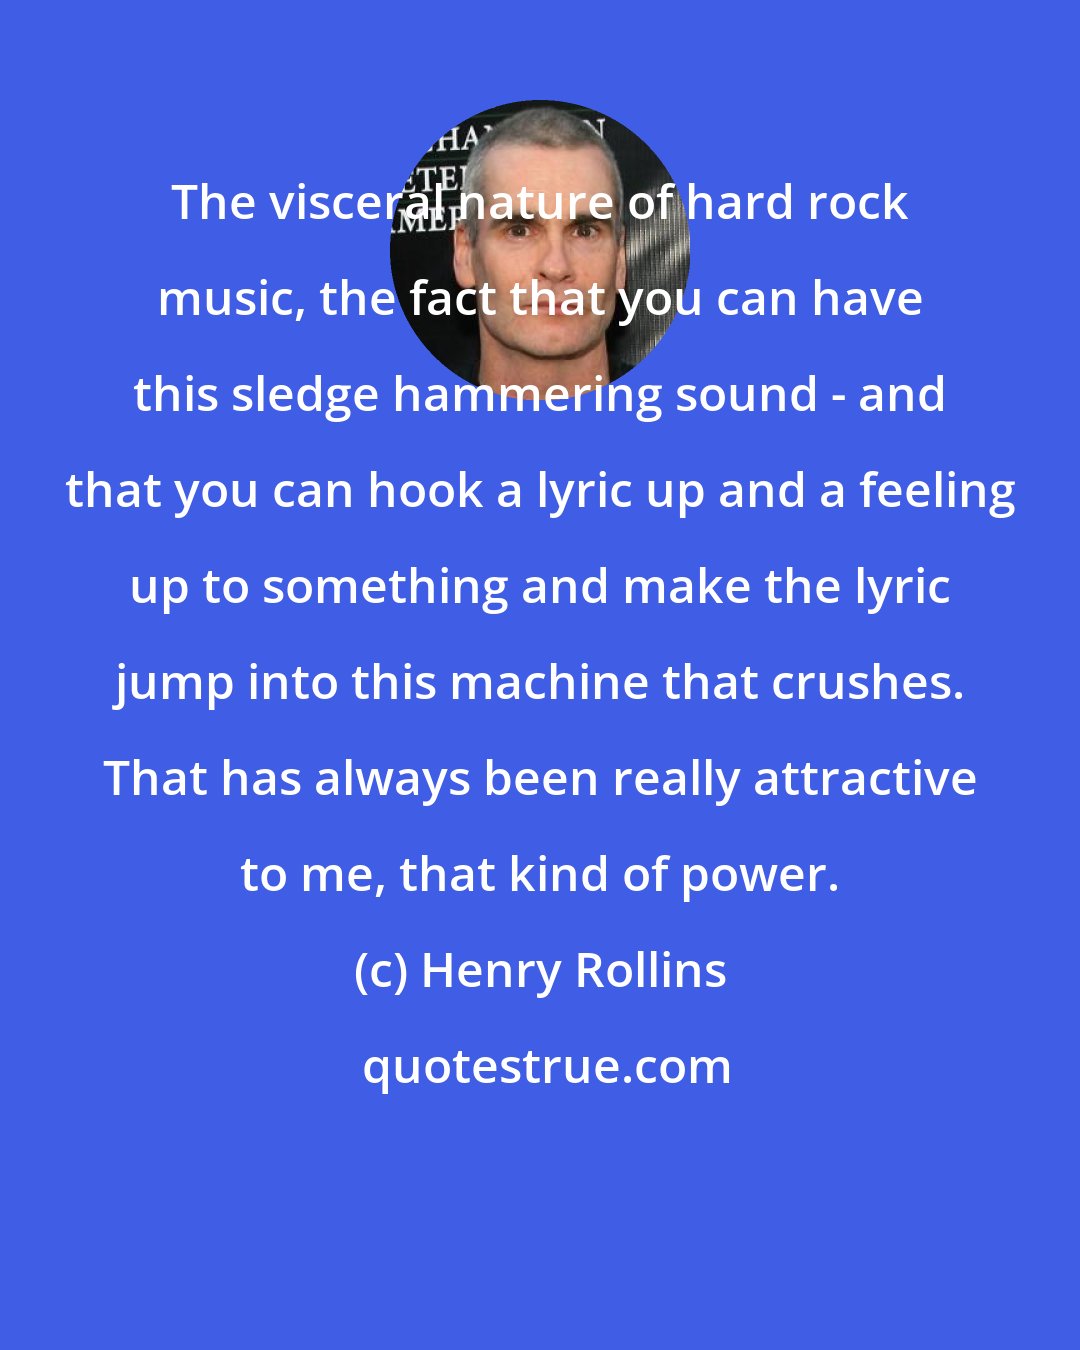 Henry Rollins: The visceral nature of hard rock music, the fact that you can have this sledge hammering sound - and that you can hook a lyric up and a feeling up to something and make the lyric jump into this machine that crushes. That has always been really attractive to me, that kind of power.